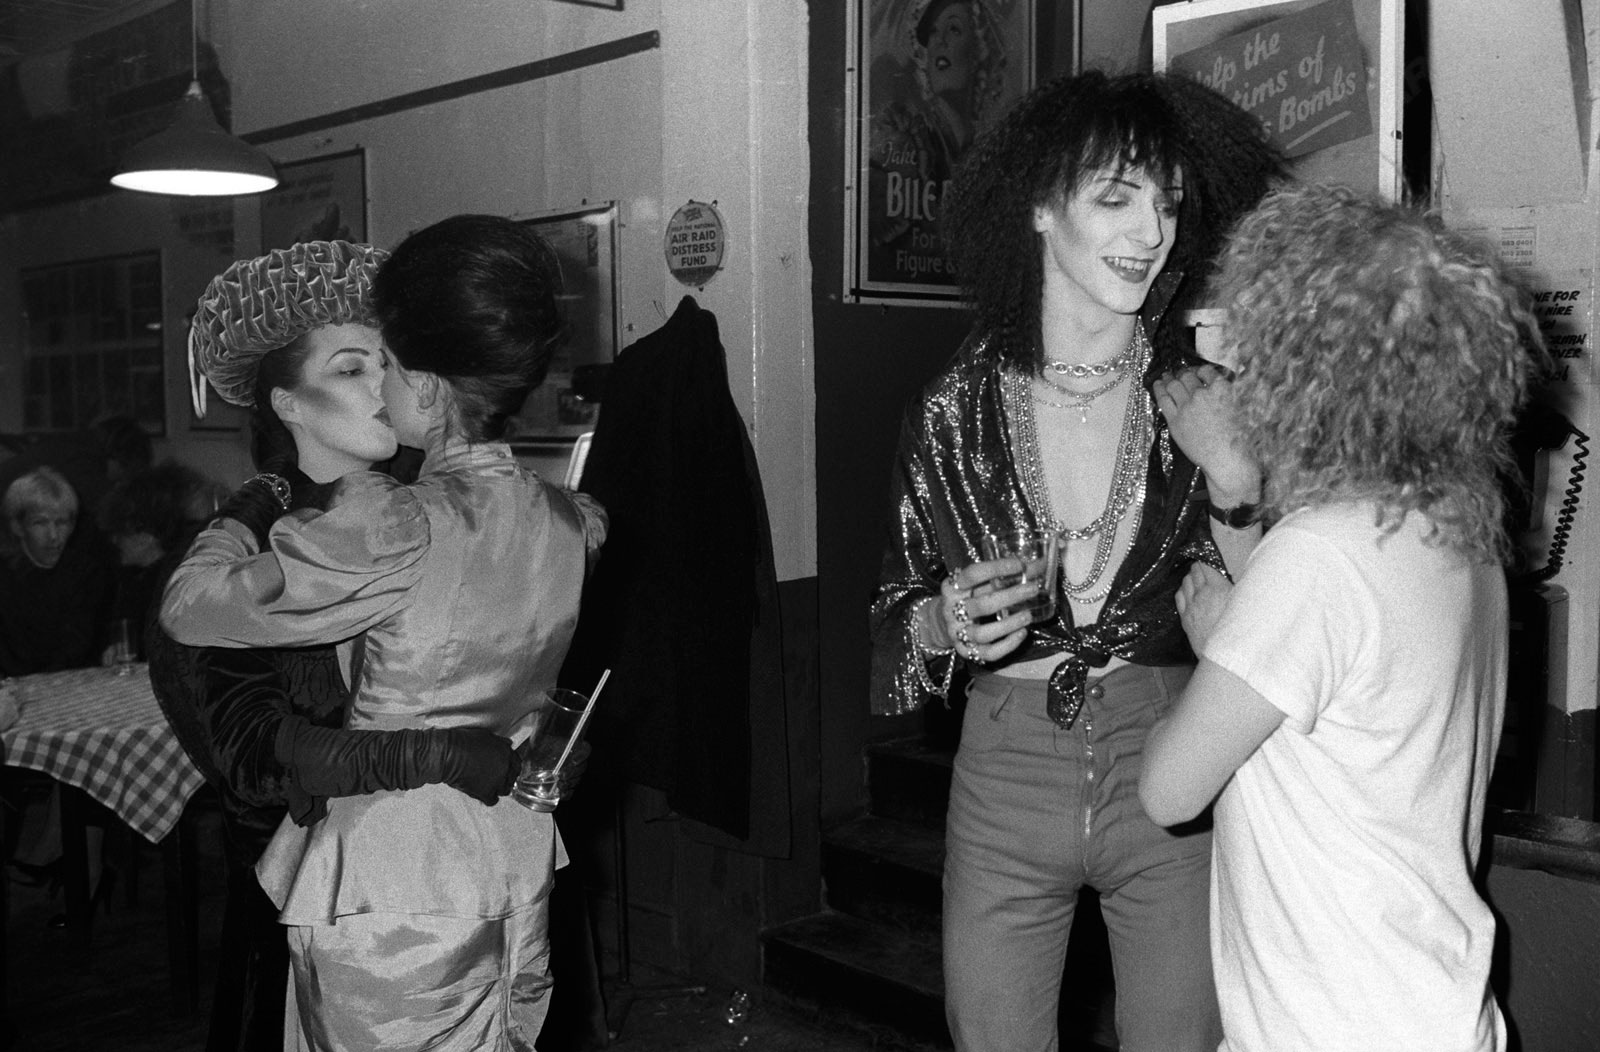 Group of friends II at the Blitz Club, Covent Garden, London, 1980